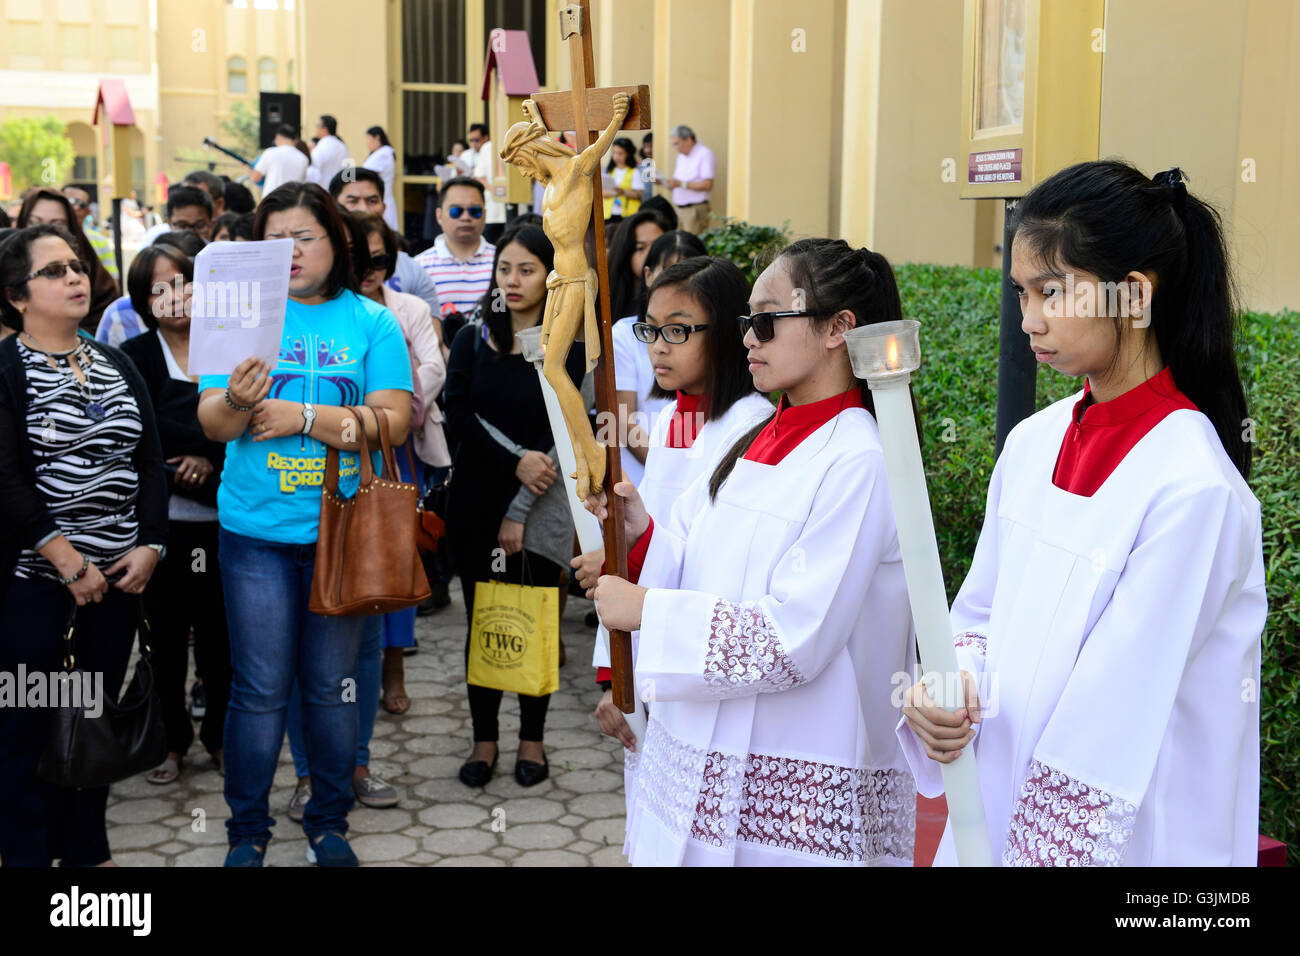 QATAR, Doha, religious complex with churches, filipino migrant worker going to mass on friday / KATAR, Doha, Religionskomplex mit Kirchen am Stadtrand, katholische Kirche, philippinische Gastarbeiter in Tagalog Messe am Freitag, Kreuzgang Stock Photo